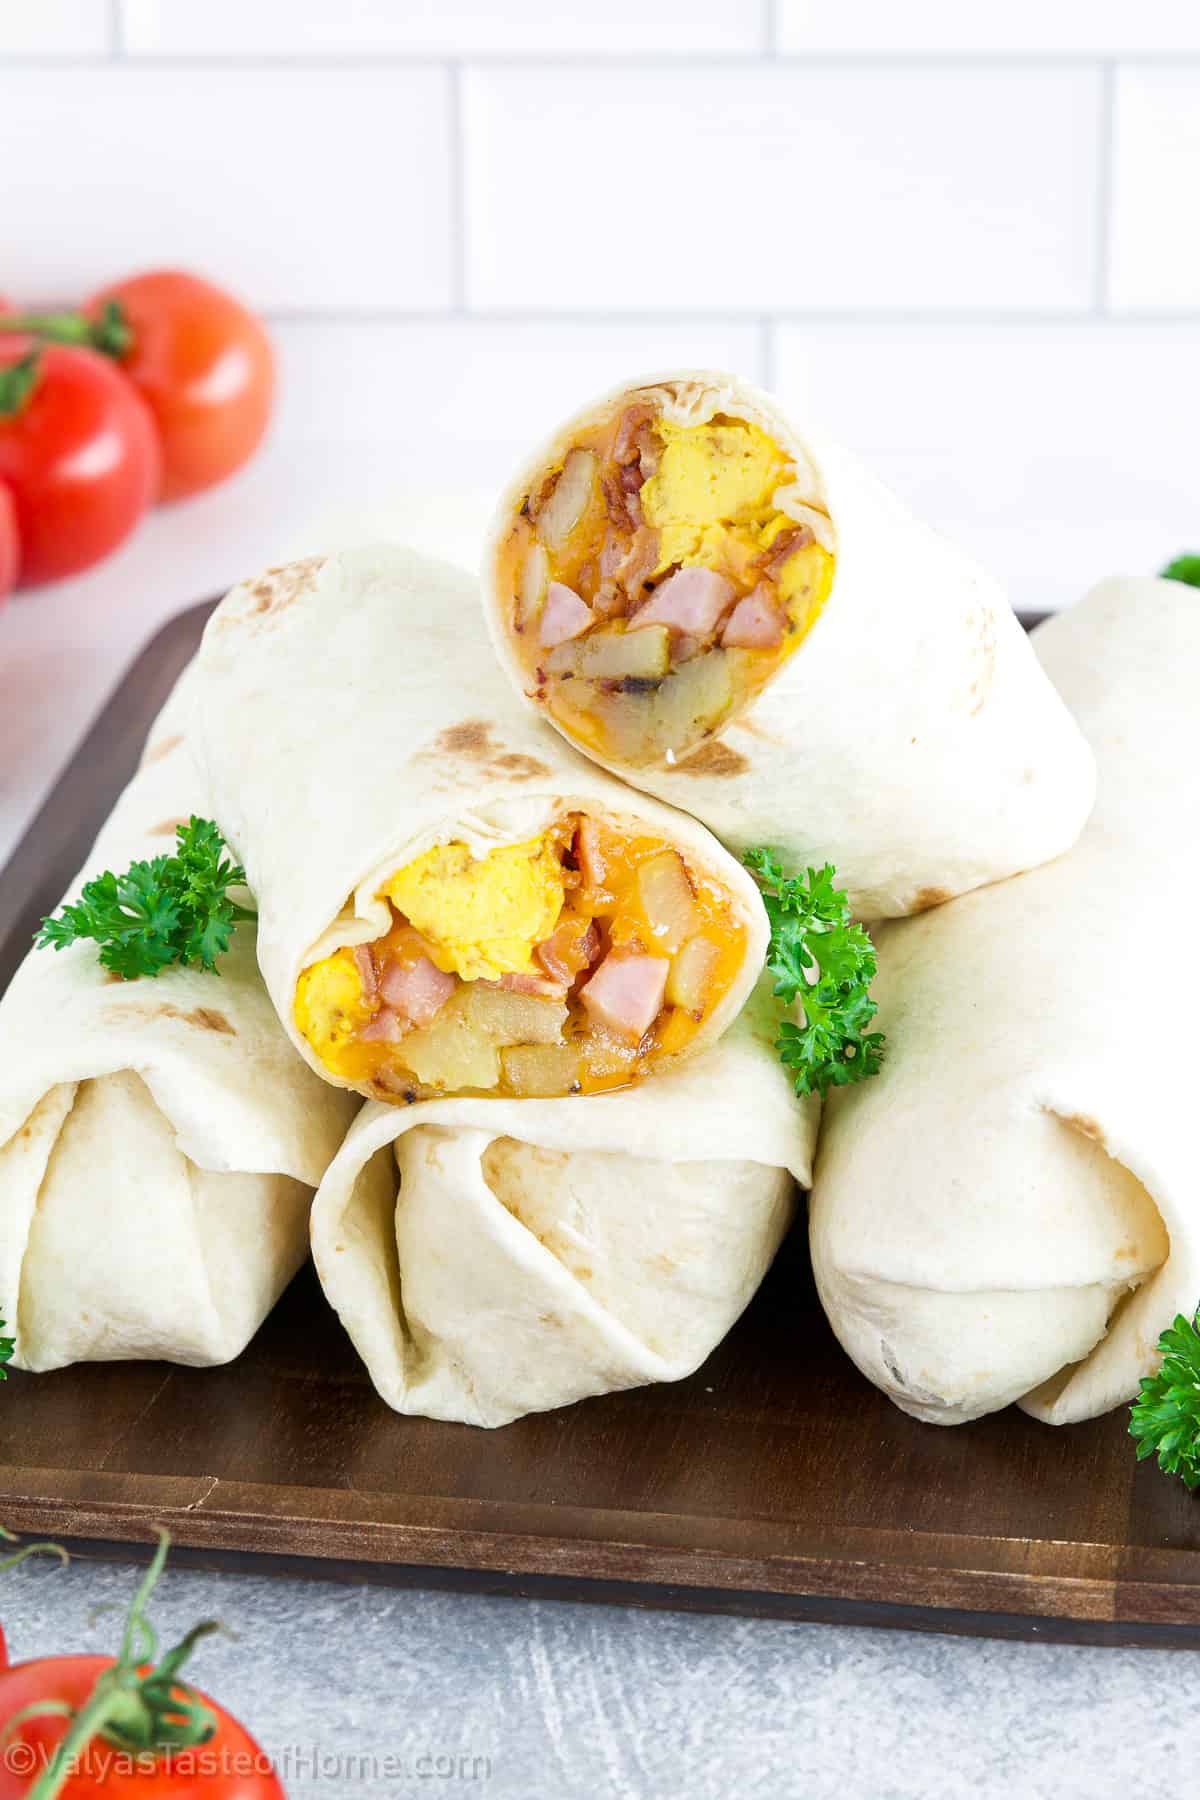 These Make-Ahead Breakfast Burritos are freezer-friendly and easy to make. They work perfectly for busy schedules and all you need to do is reheat them!